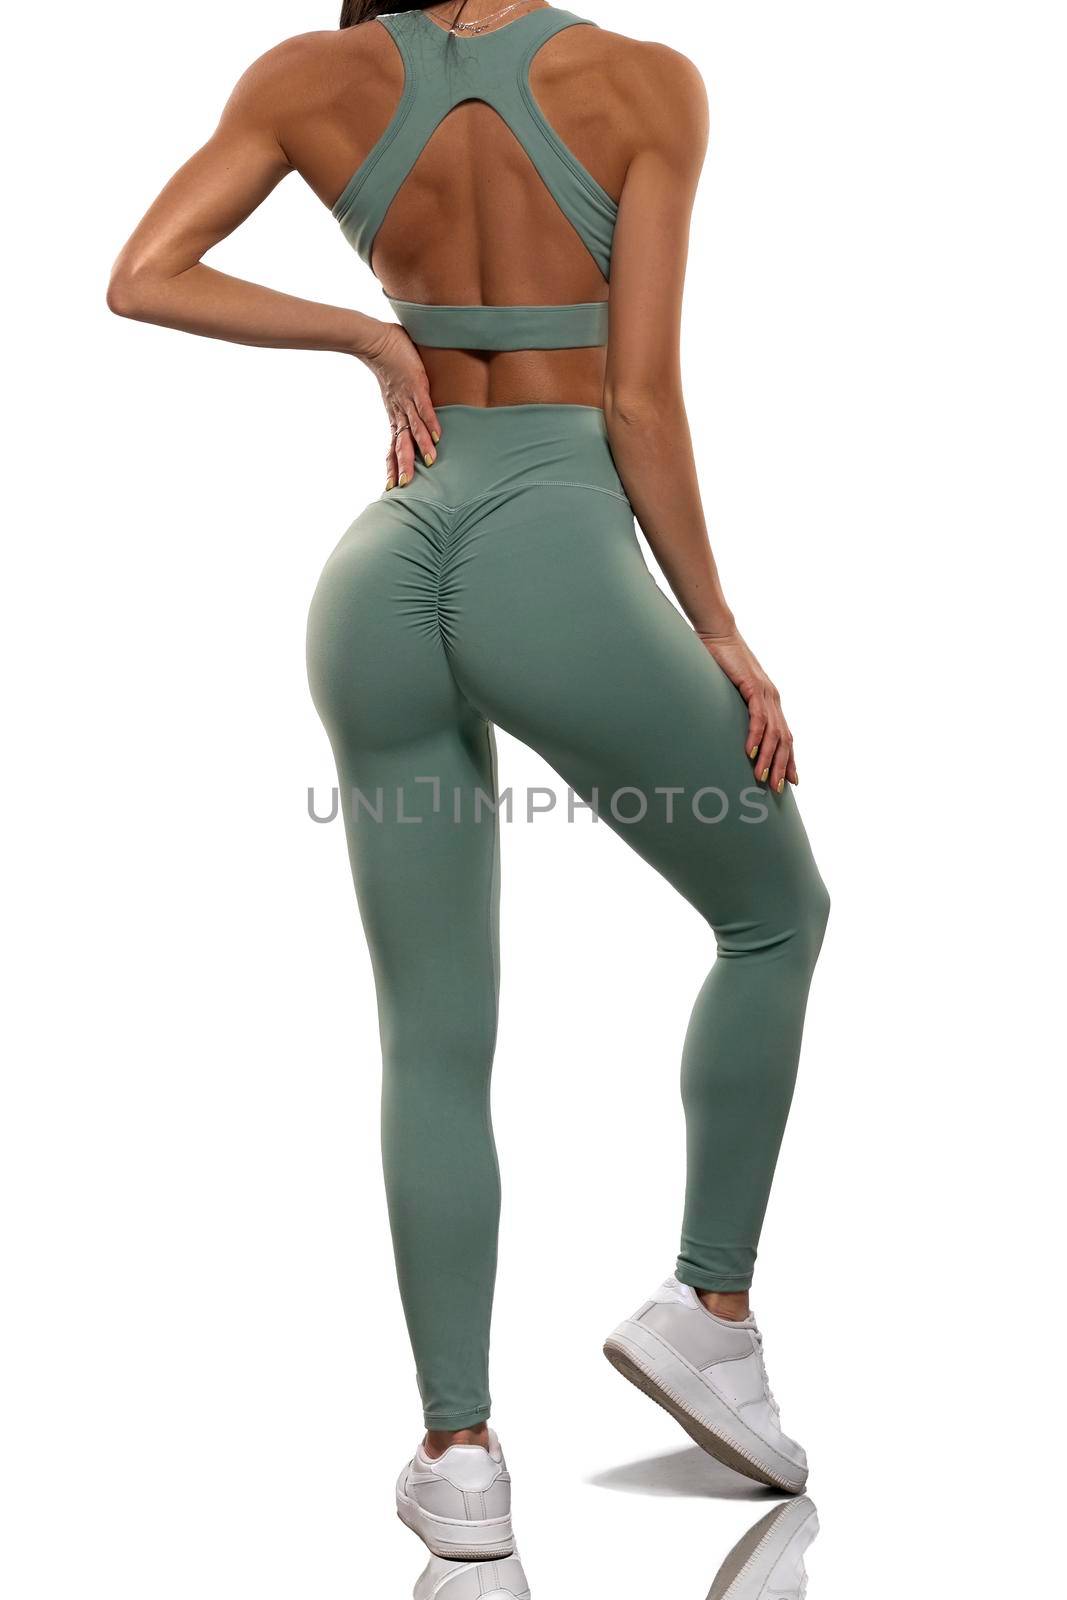 legs girl in olive leggings and top stay back on a white background by but_photo